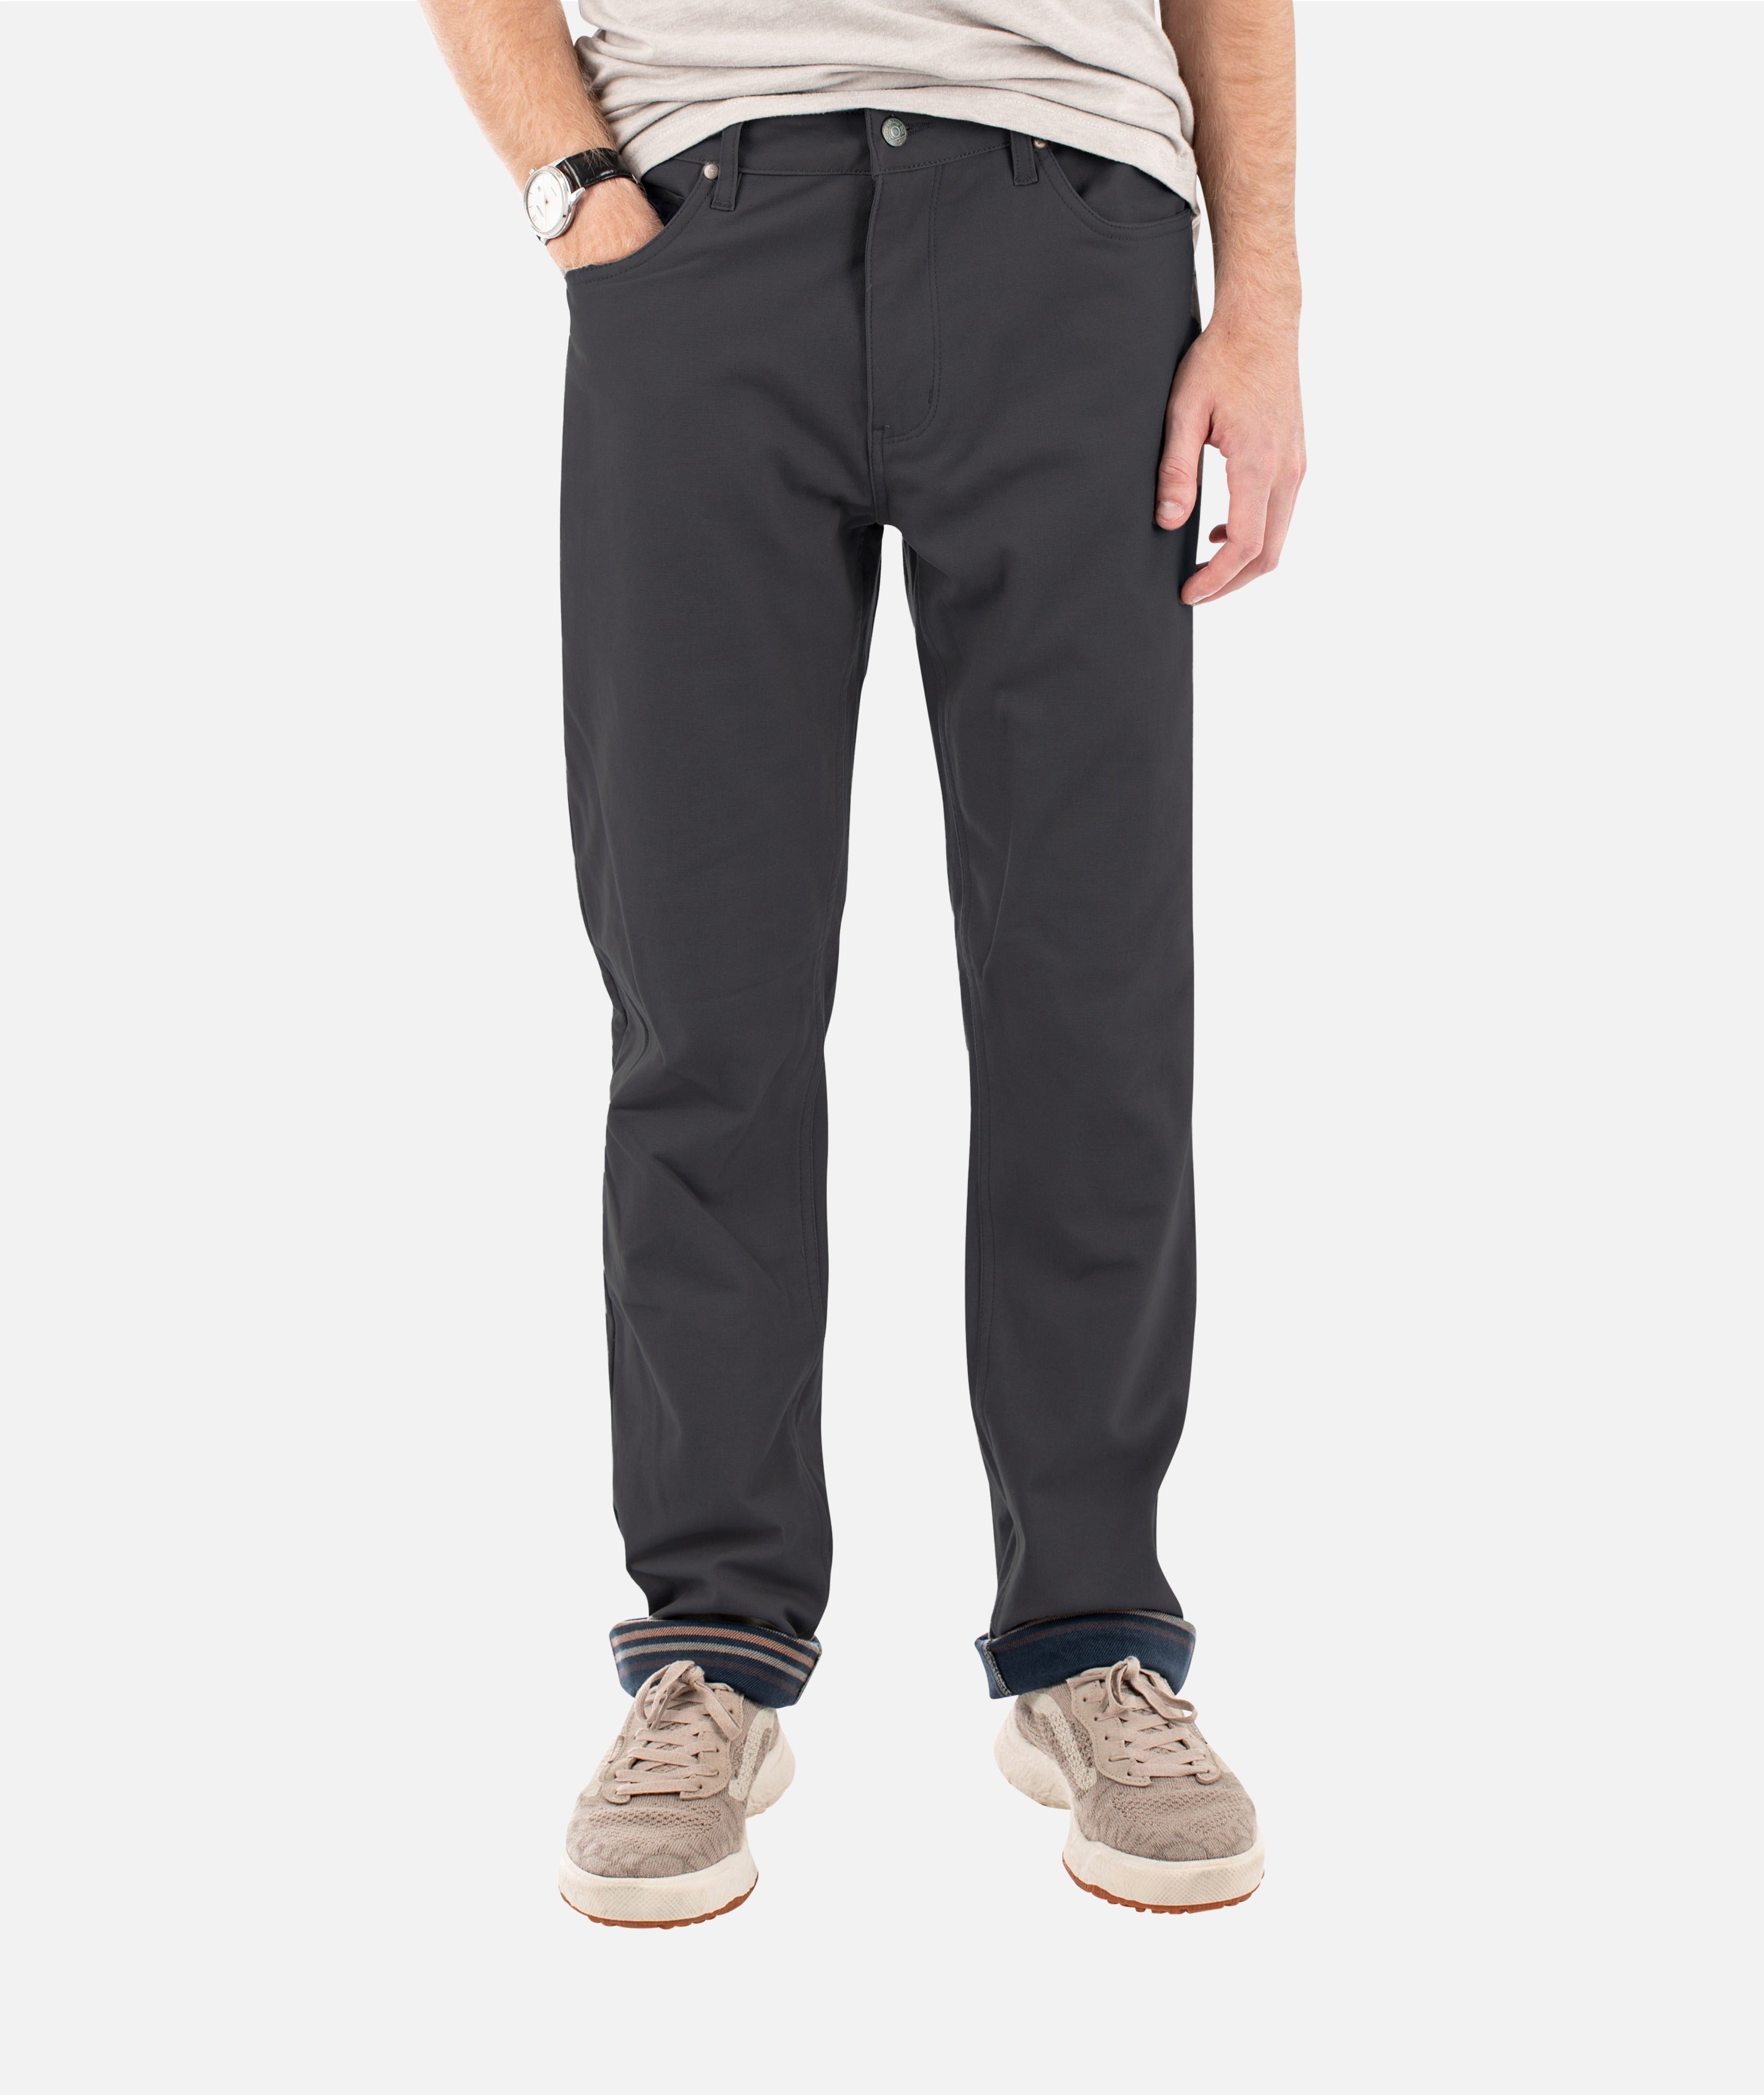 Mariner Lined Pants - Graphite – Jetty